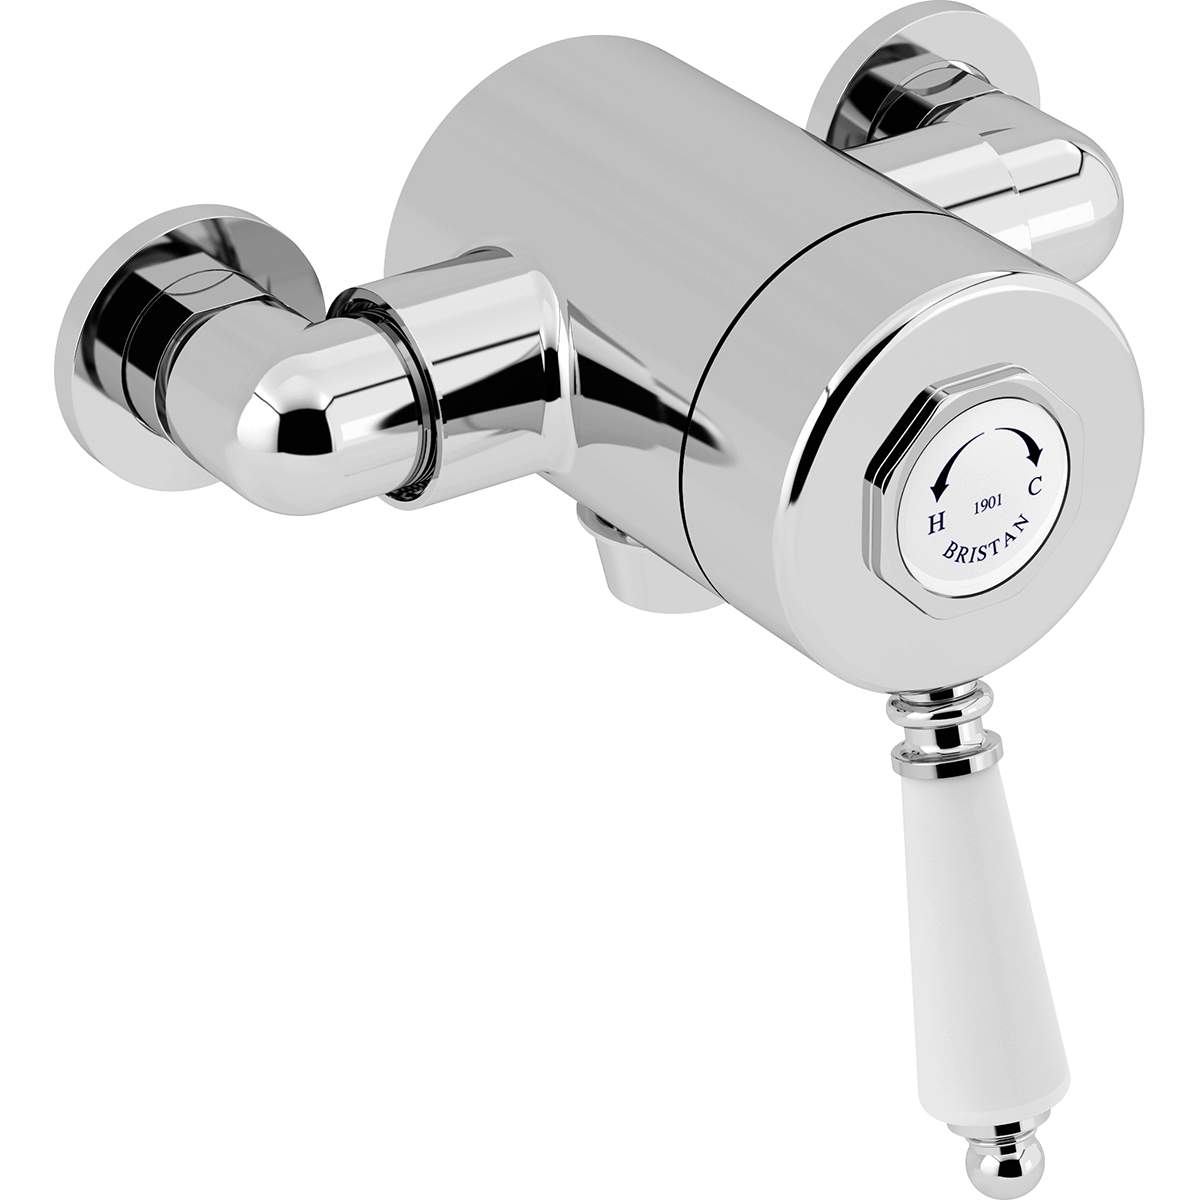 Bristan 1901 Exposed Single Control Shower with Bottom Outlet (N2 SQSHXVO C)